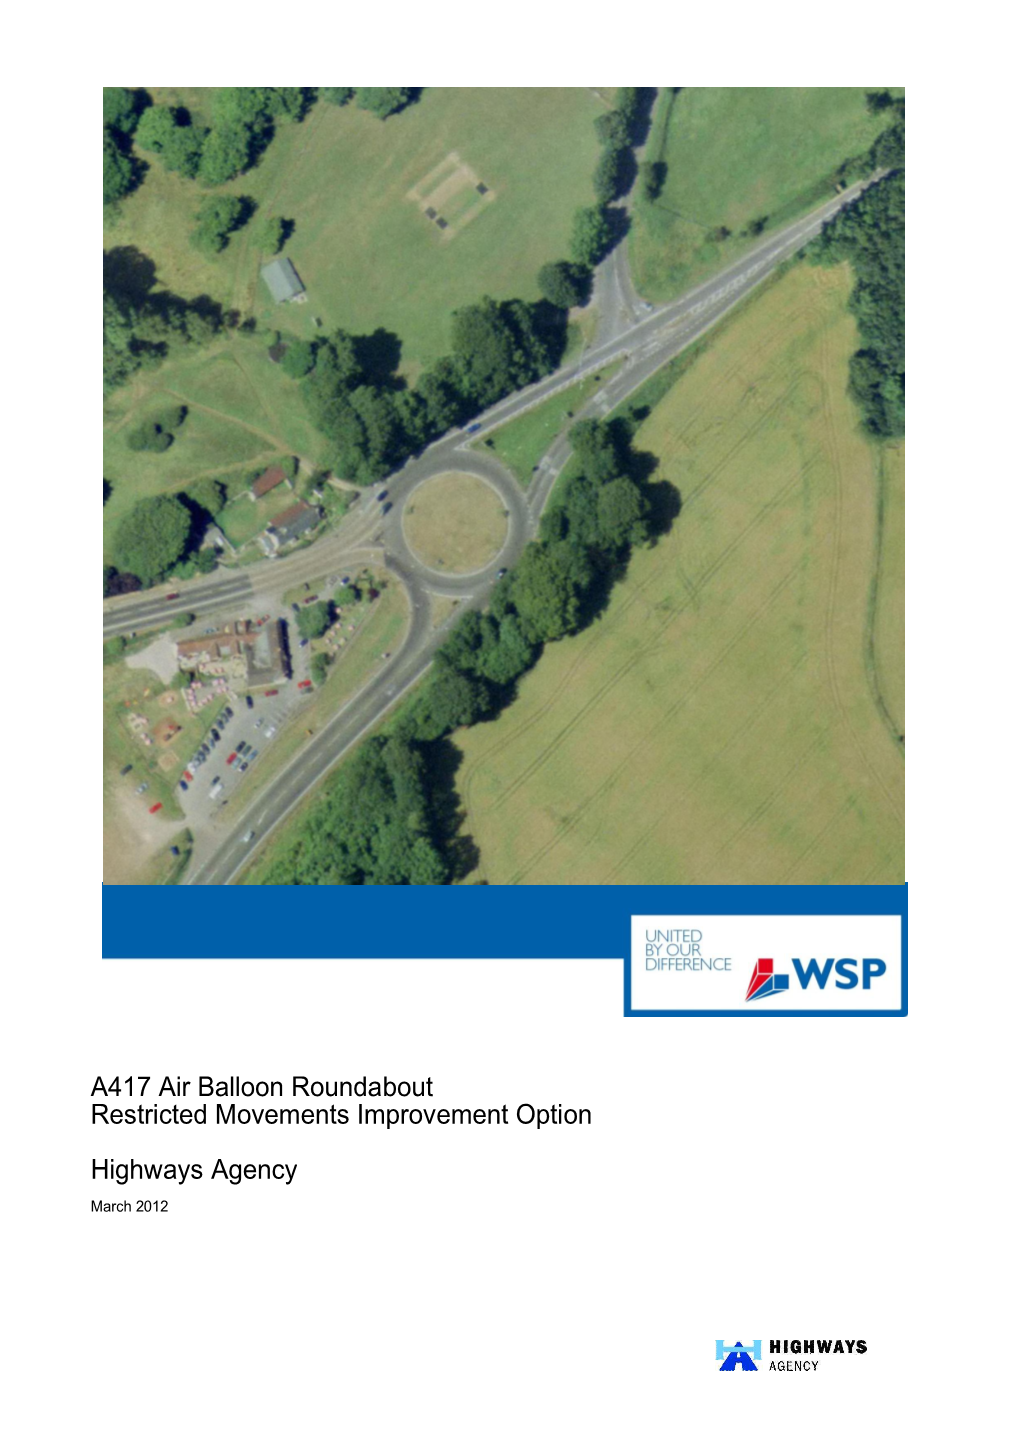 A417 Air Balloon Roundabout Restricted Movements Improvement Option